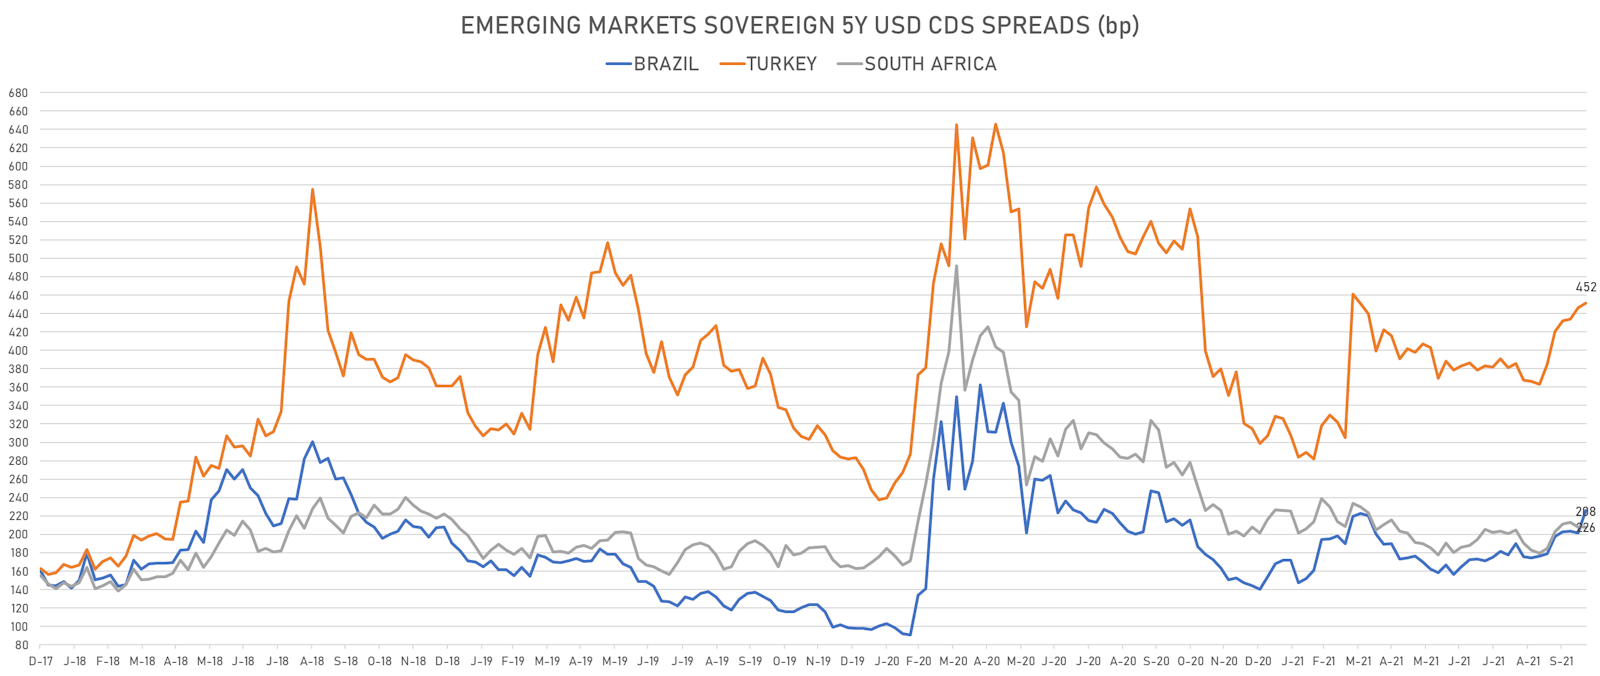 5-Year USD Credit Default Swap Spreads For Turkey, Brazil And South Africa | Sources: ϕpost, Refinitiv data